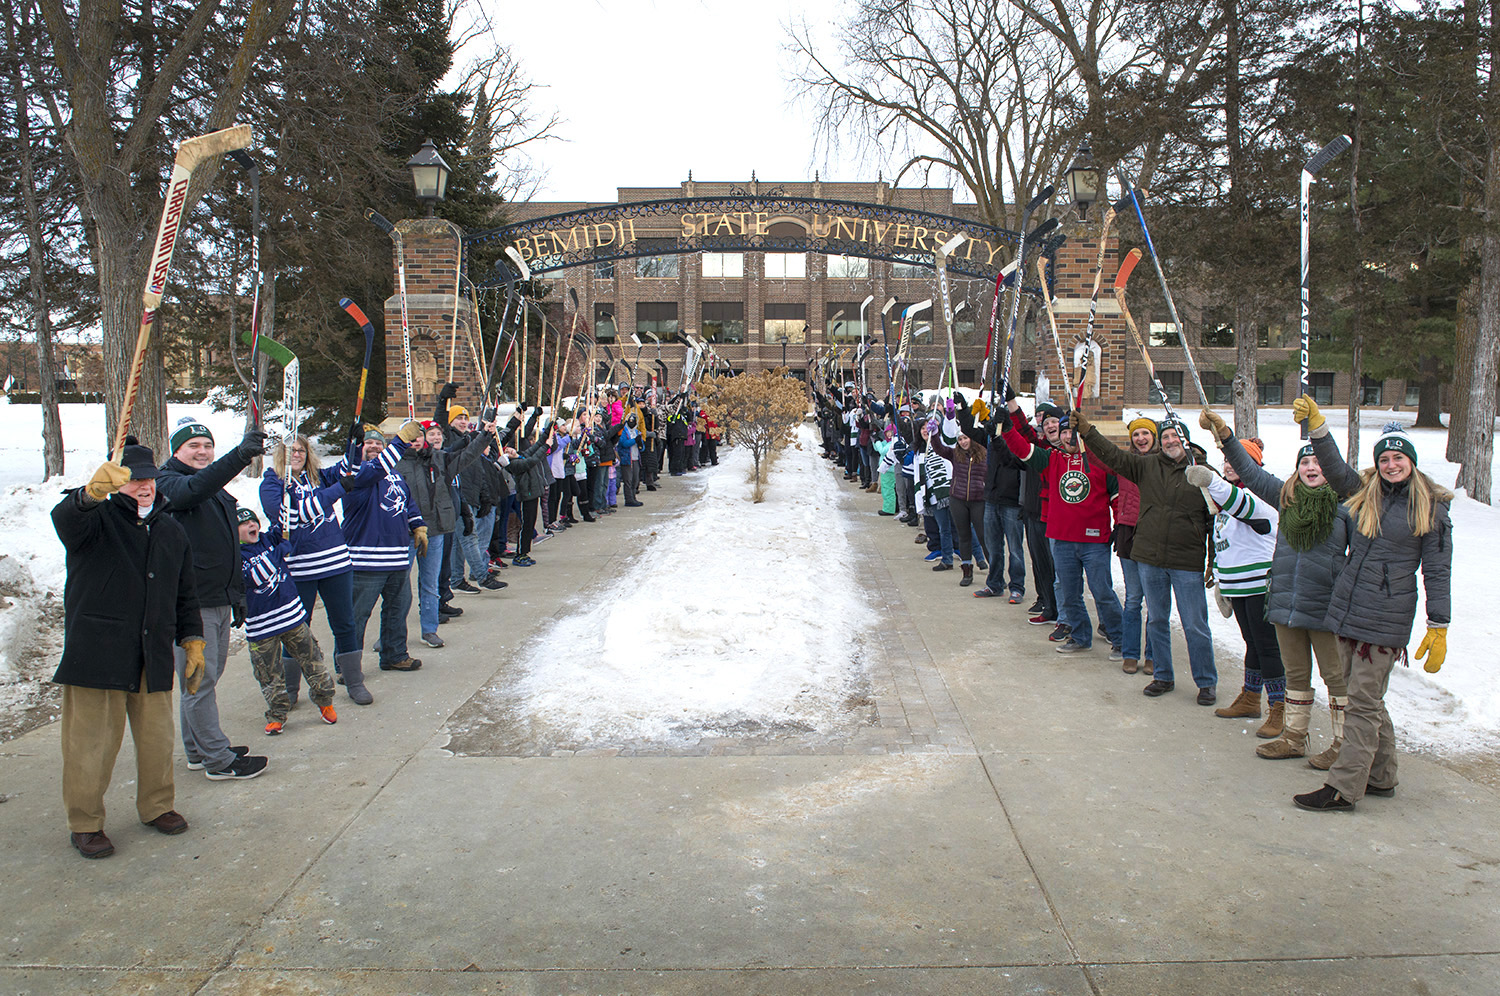 100 people came together to show their Hockey Day Minnesota pride today on the BSU campus. 